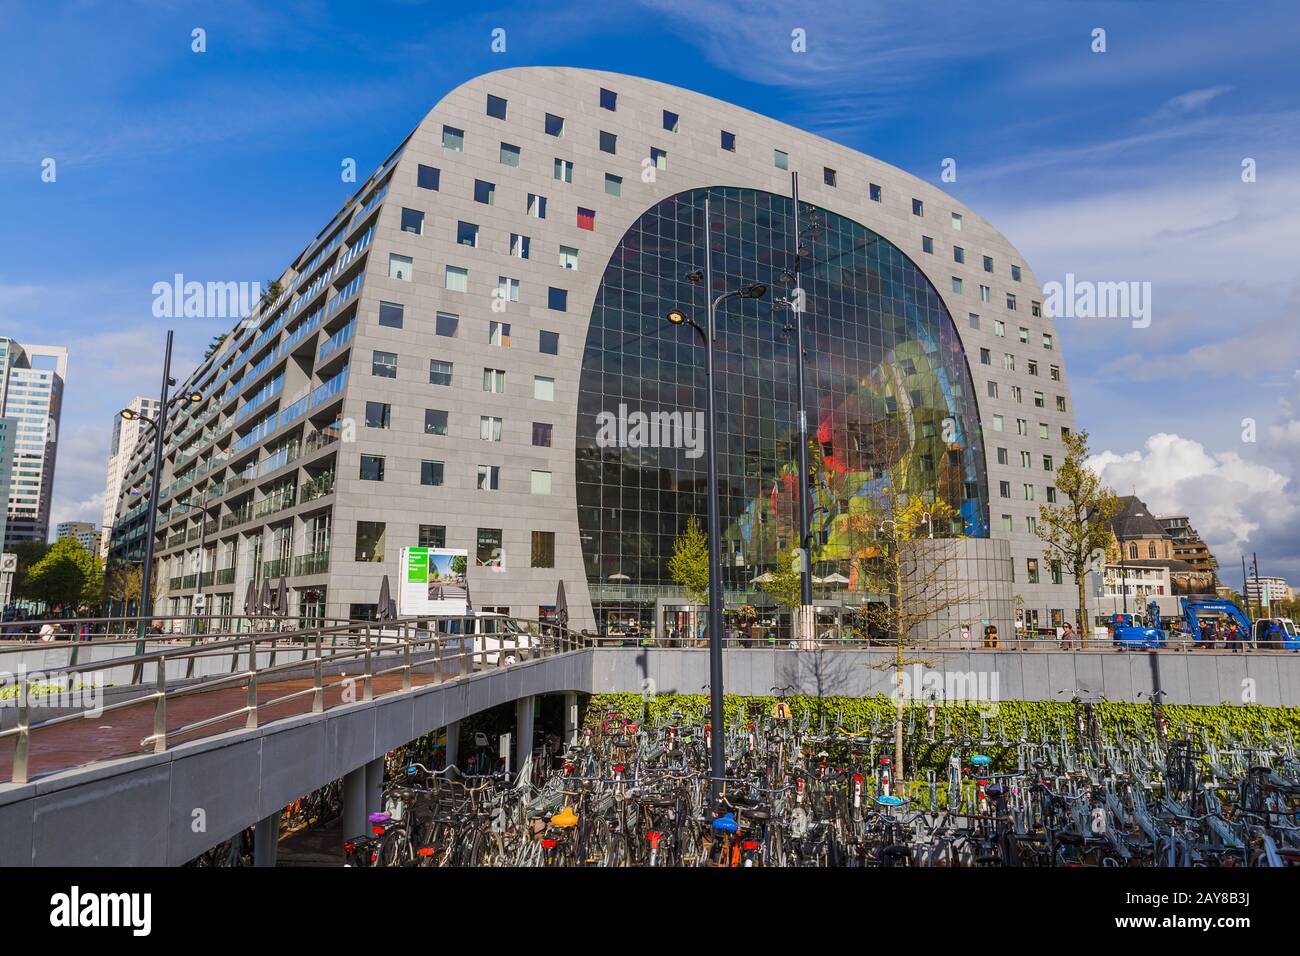 Rotterdam, Netherlands - April 27, 2017: Famous modern market Markthal and bicycle parking in Rotterdam Stock Photo